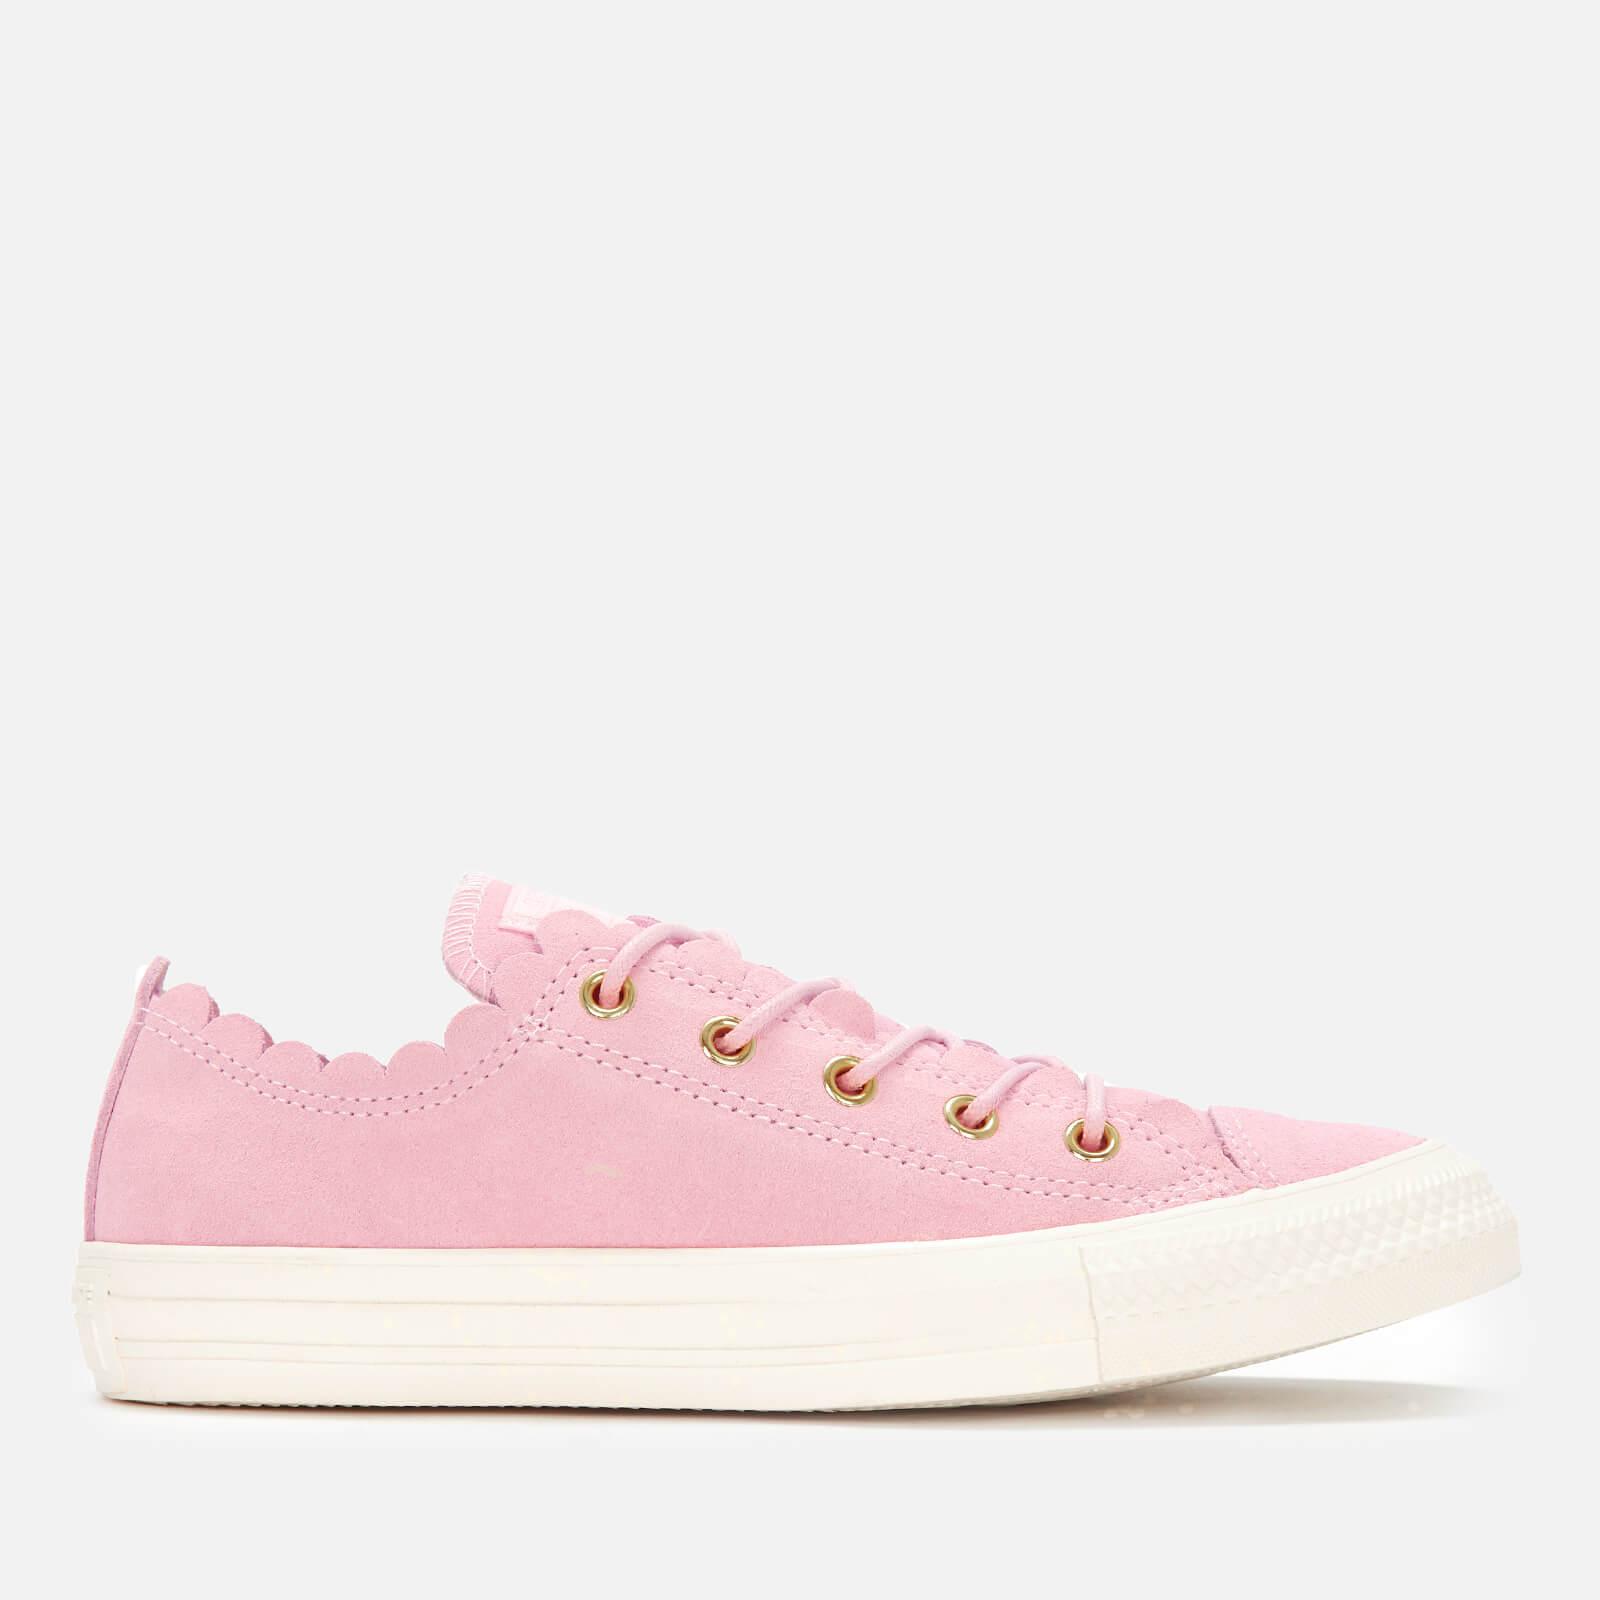 Star Scalloped Edge Ox Trainers in Pink 